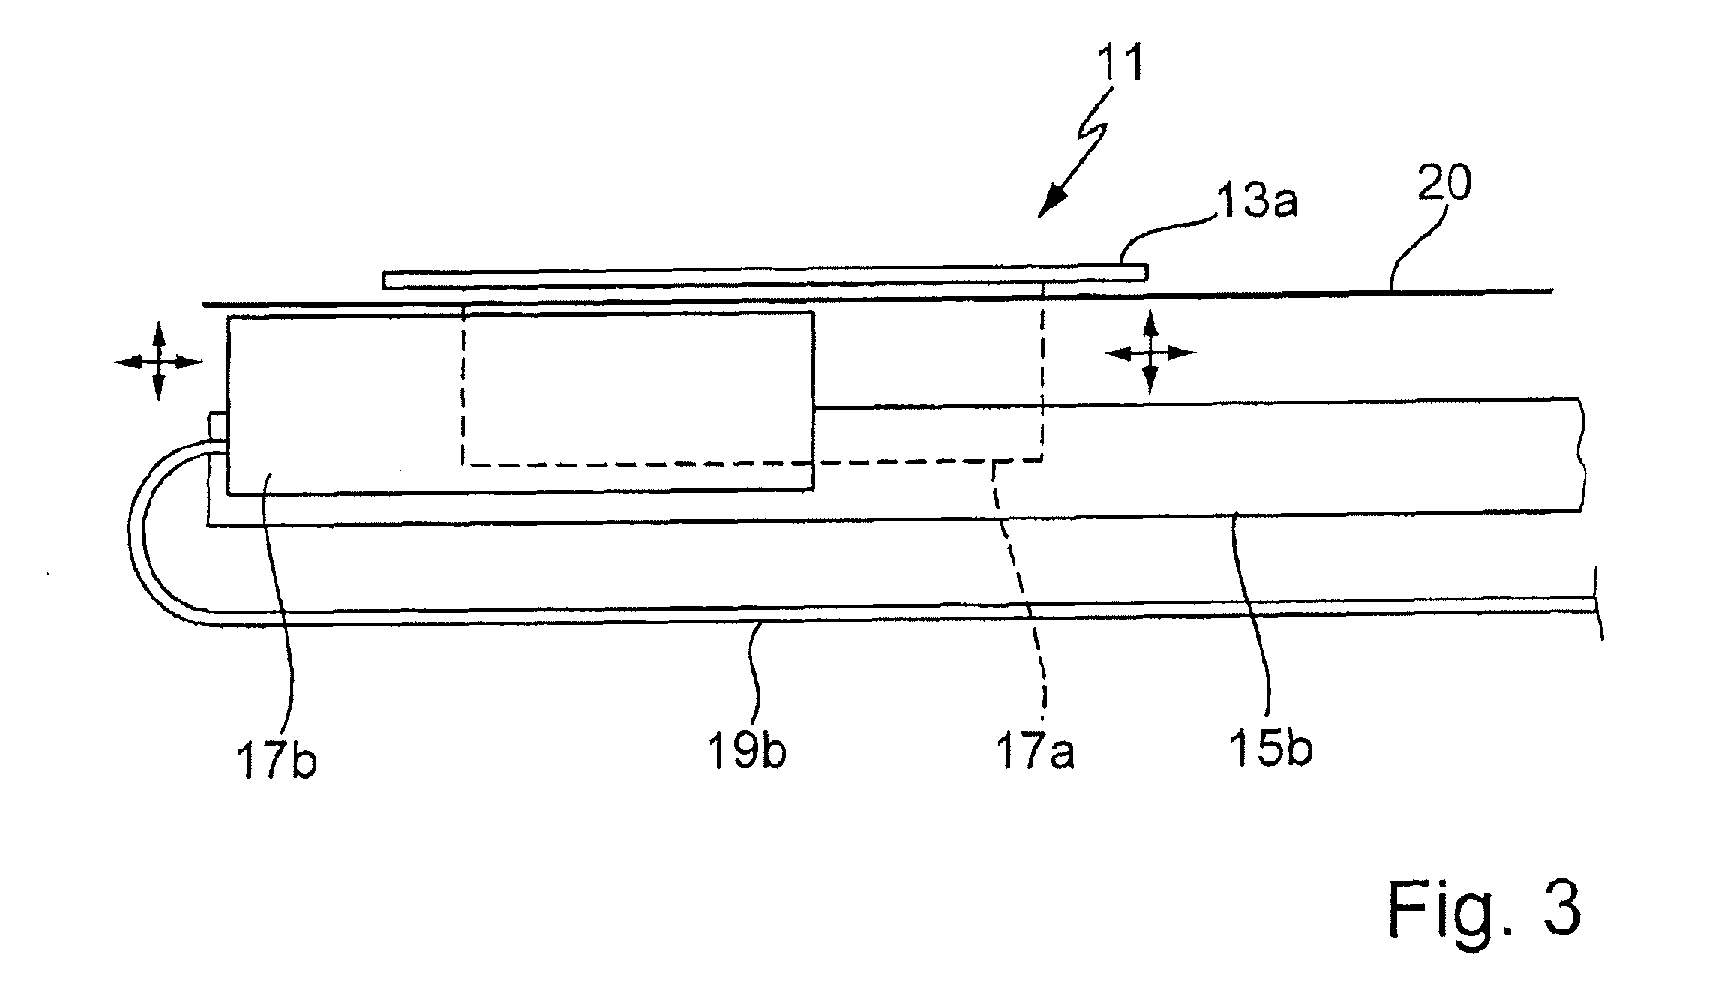 Apparatus and Method for Transporting Substrates